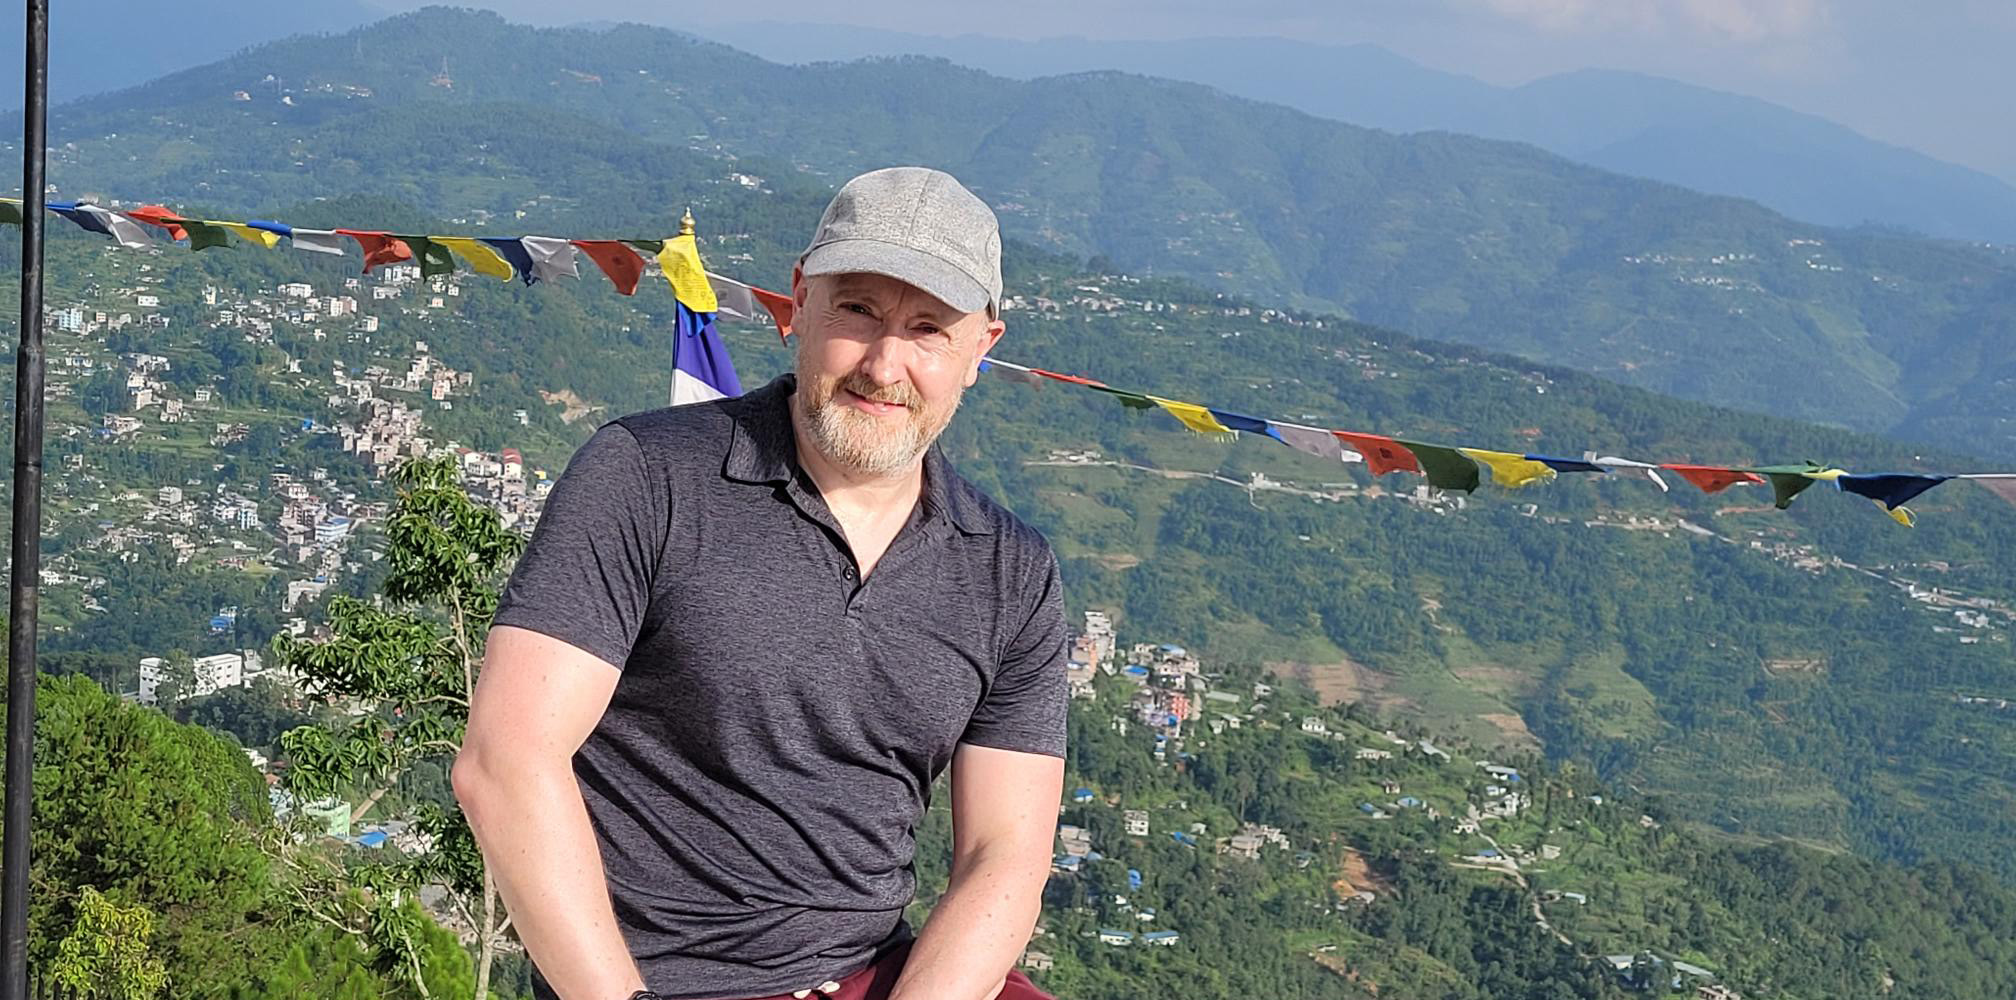 Richard Bownas posing with the Himalayan Mountains in the background